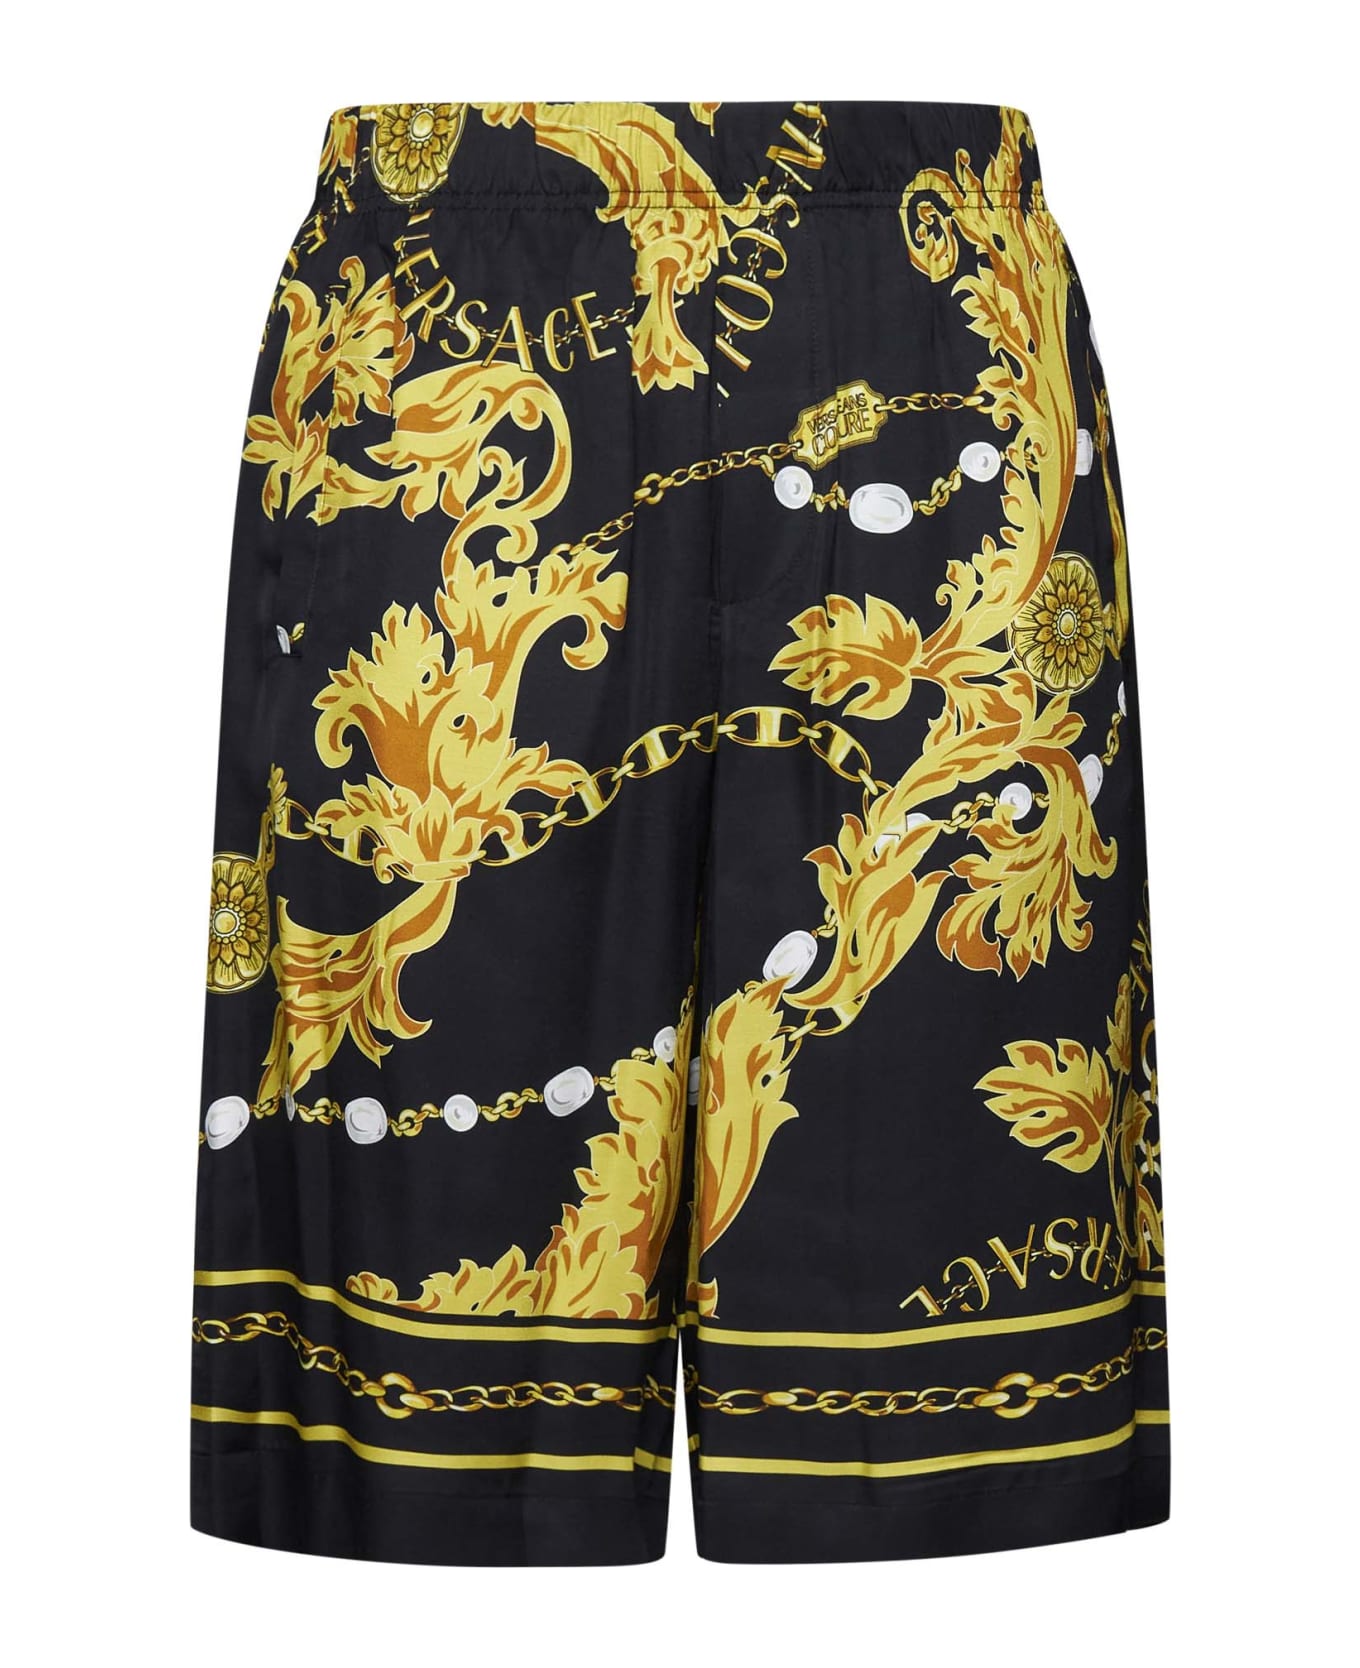 Versace Jeans Couture Chain Couture Bermuda Shorts - Black gold